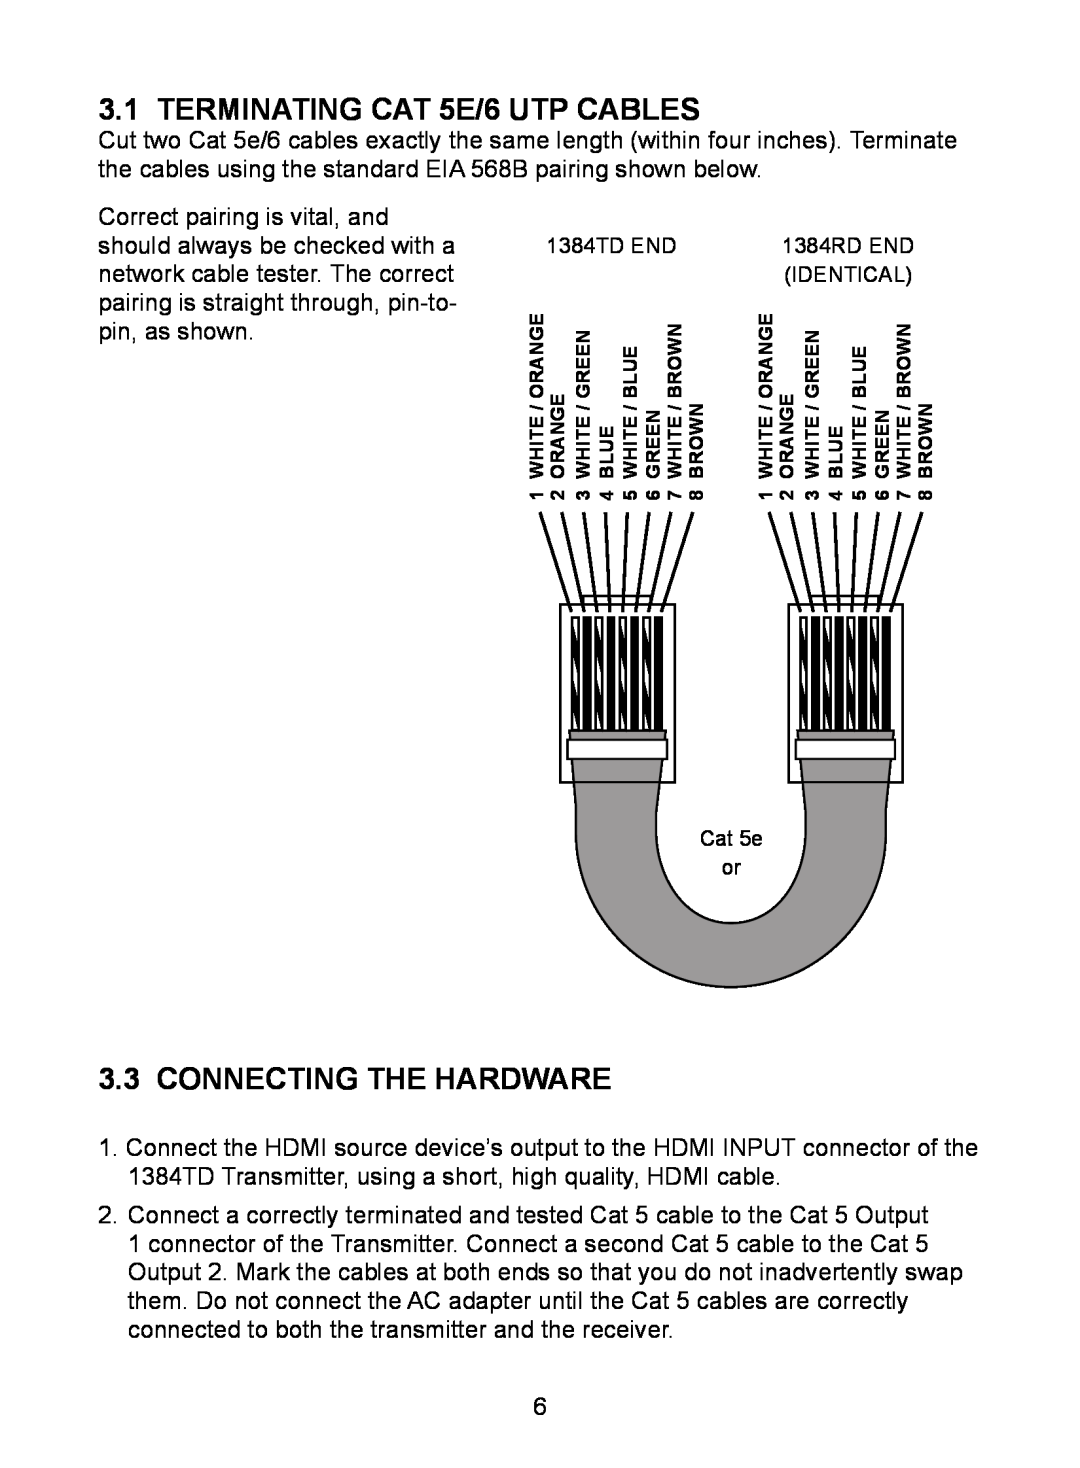 Audio Authority EDP-11 TERMINATING CAT 5E/6 UTP CABLES, Connecting The Hardware, 1384TD END, 1384RD END, Identical 